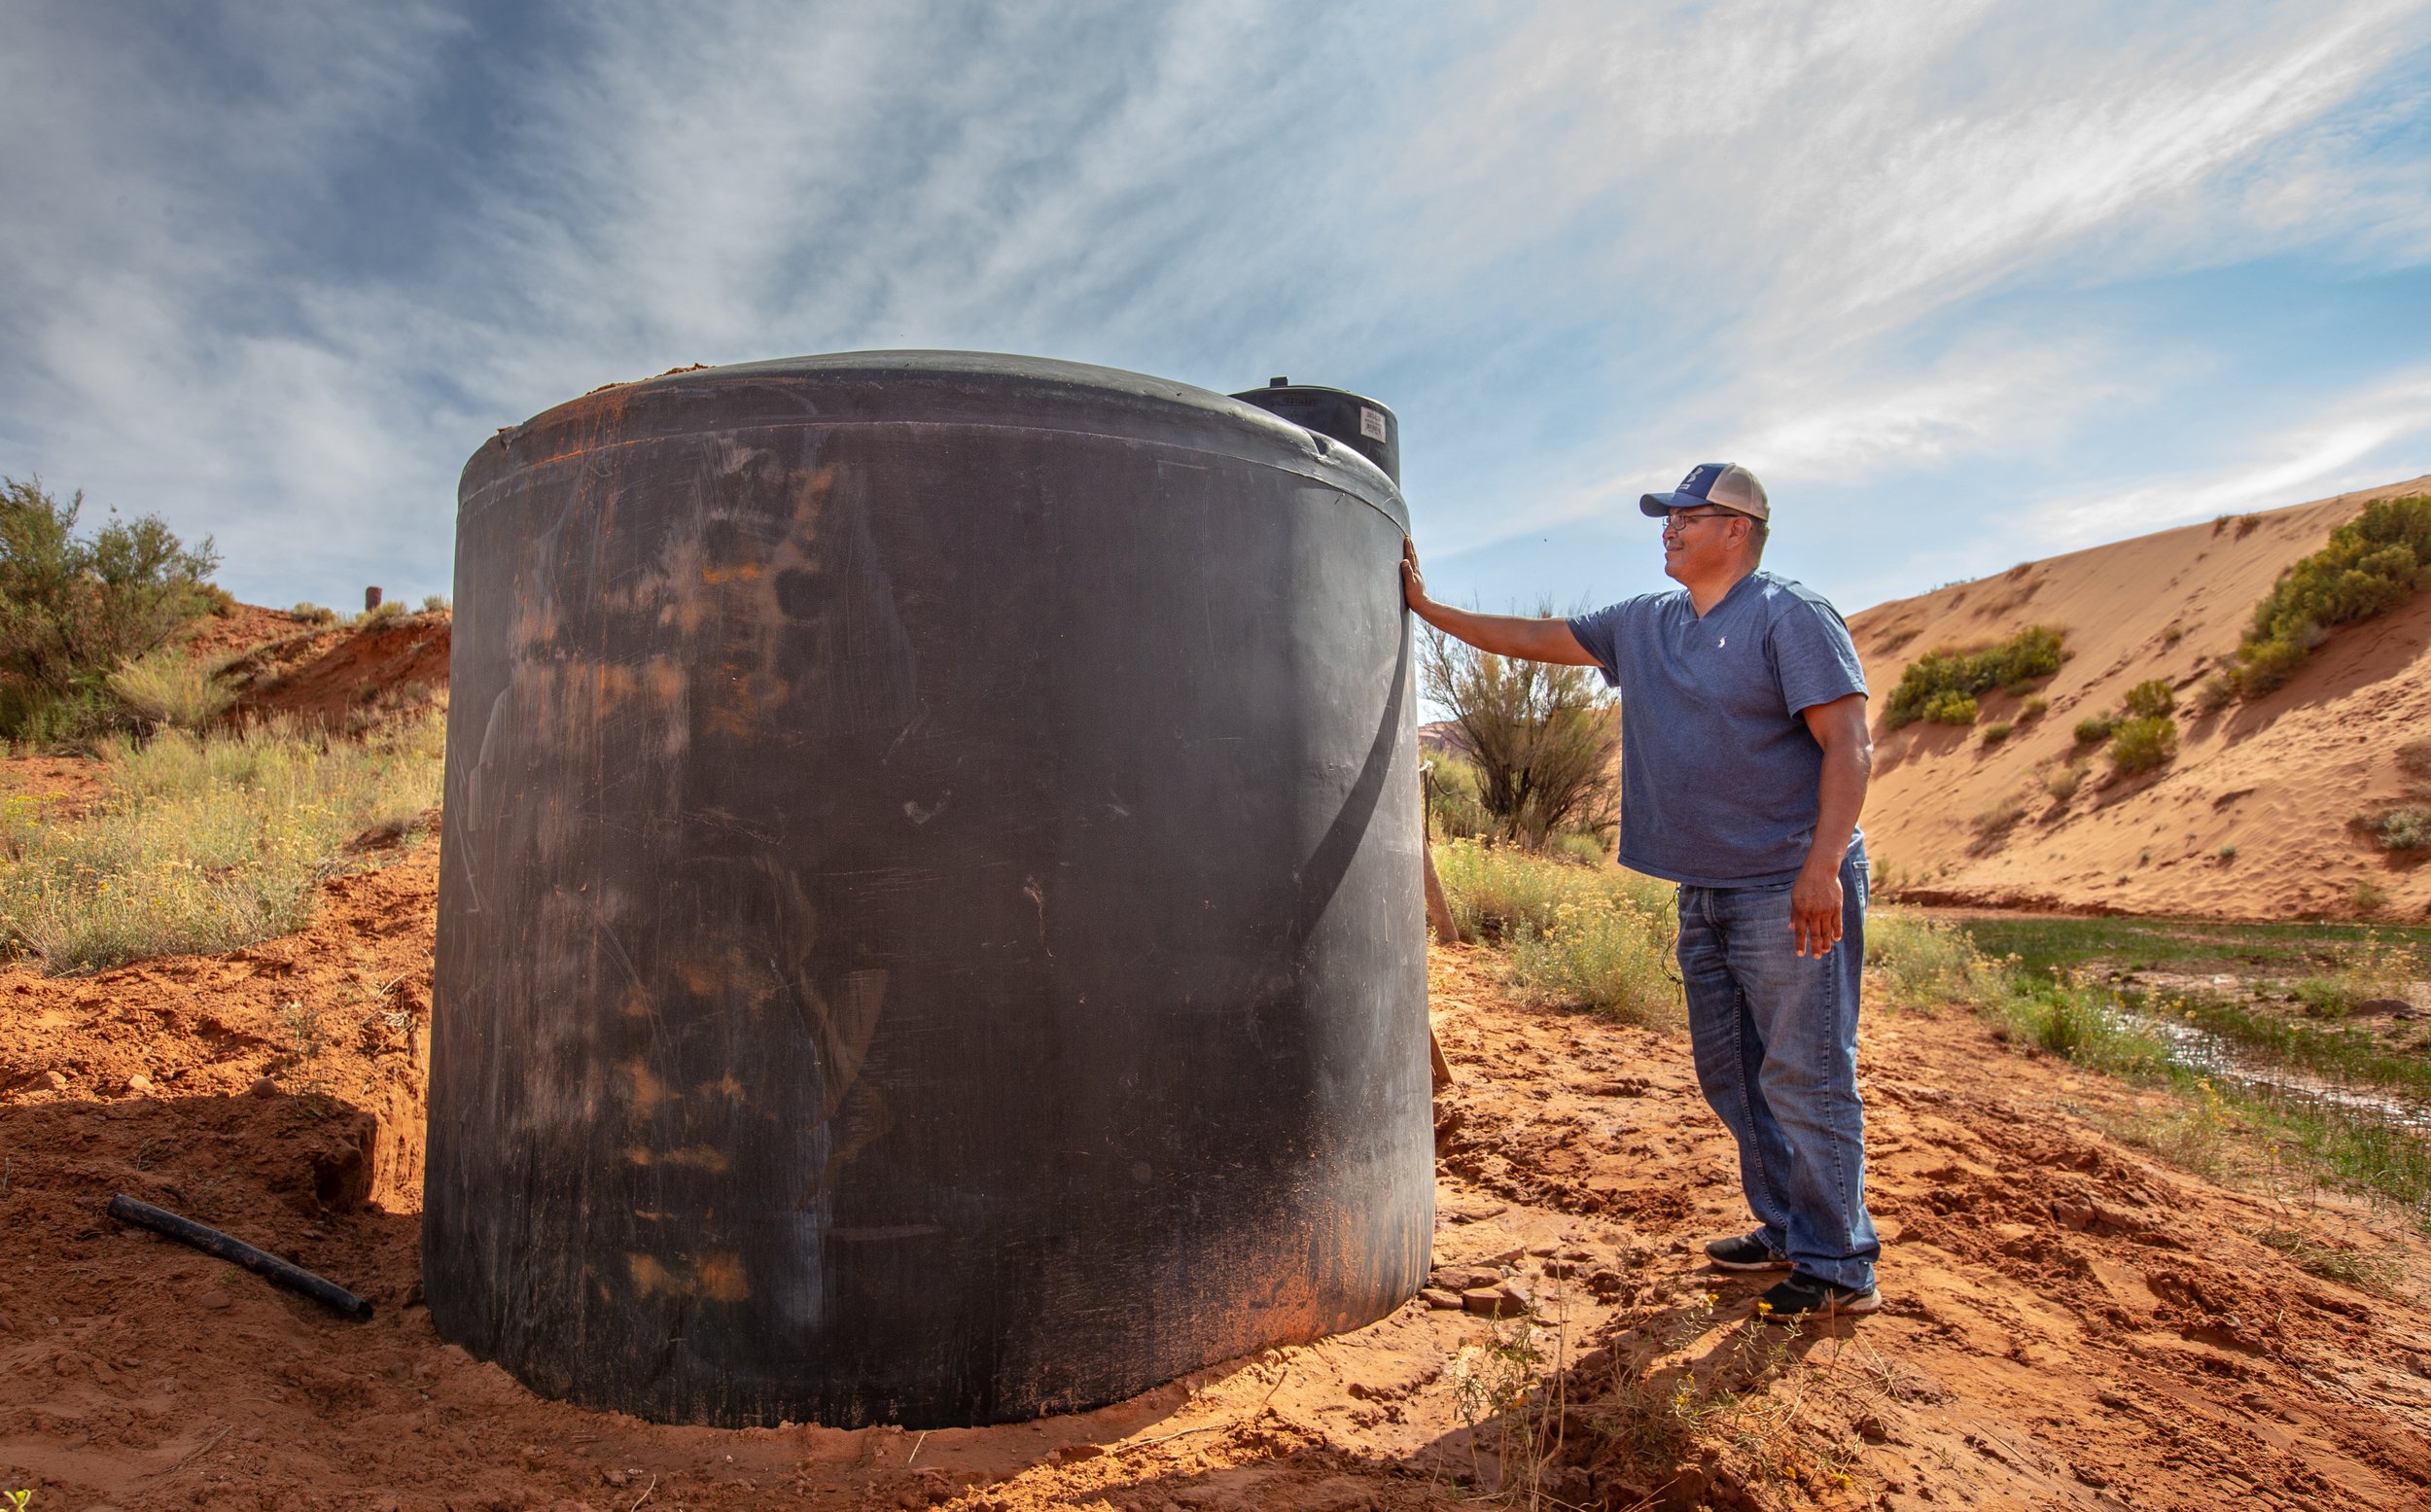  Ph.D. Post Doctoral Researcher and local Tommy Rock gives us a tour of one of two water collection tanks he maintains and samples in the Monument Valley Navajo Tribal Park. Rock’s work focuses on the identification, monitoring and communication of e